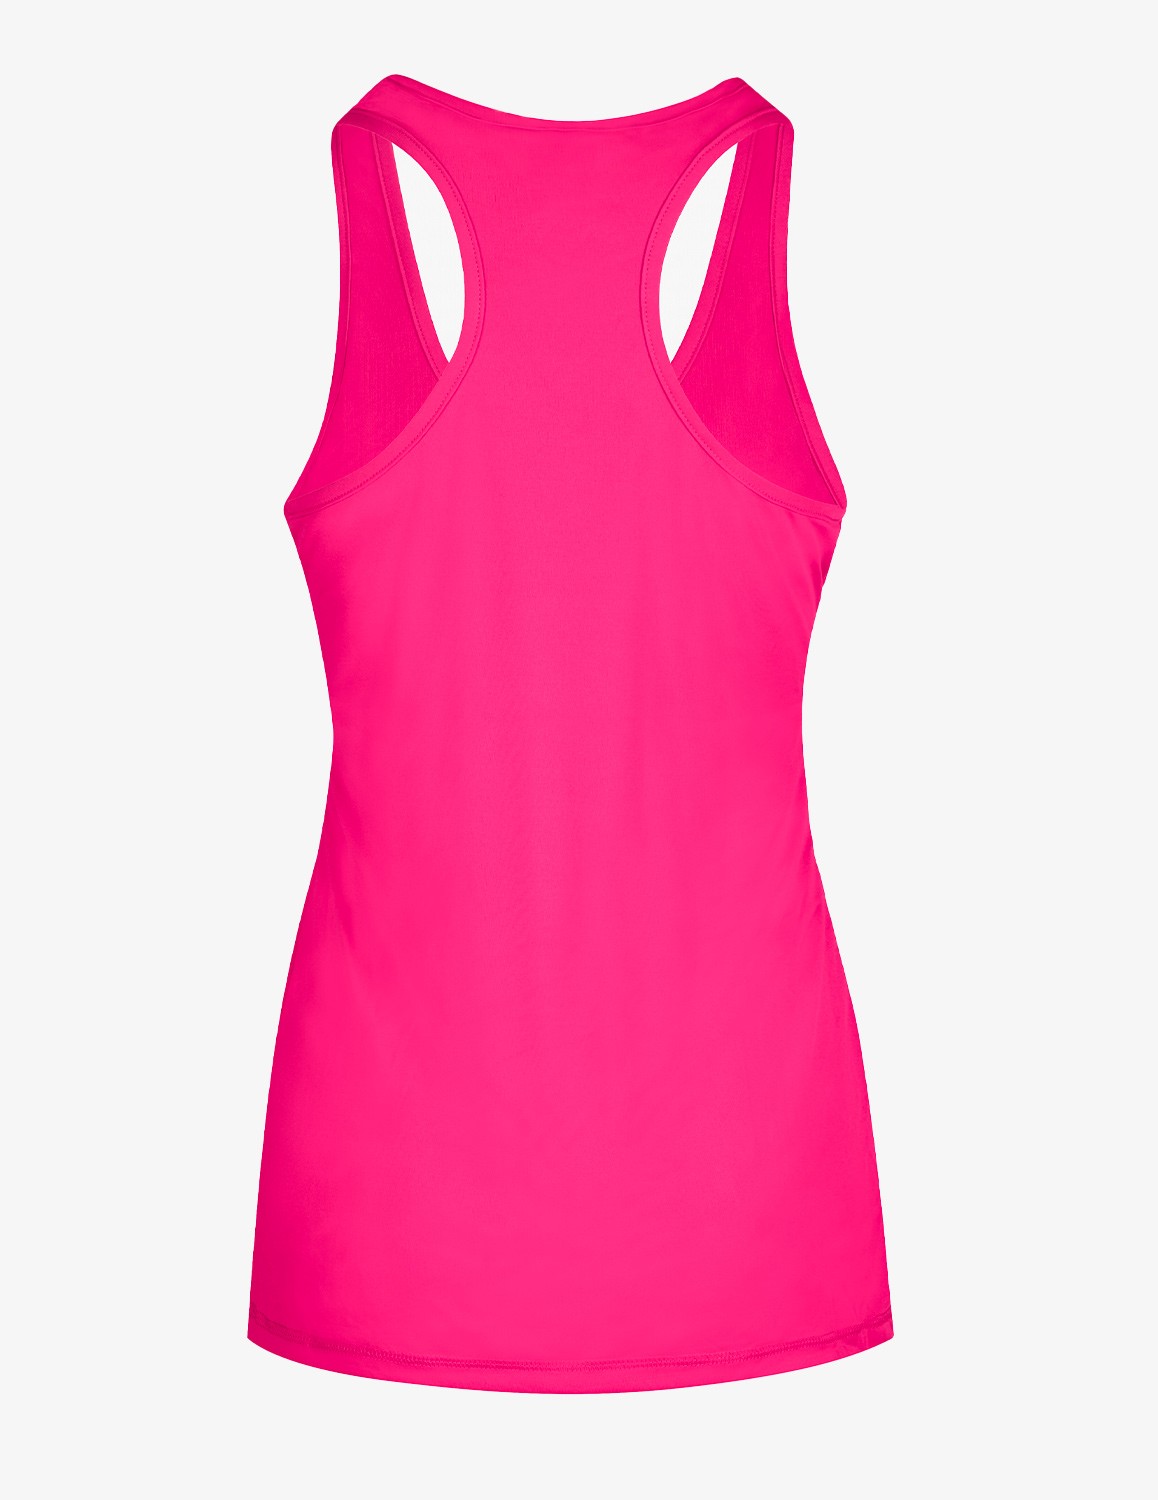 Tank SPORT IS YOUR GANG™ FIT+ Neon Pink